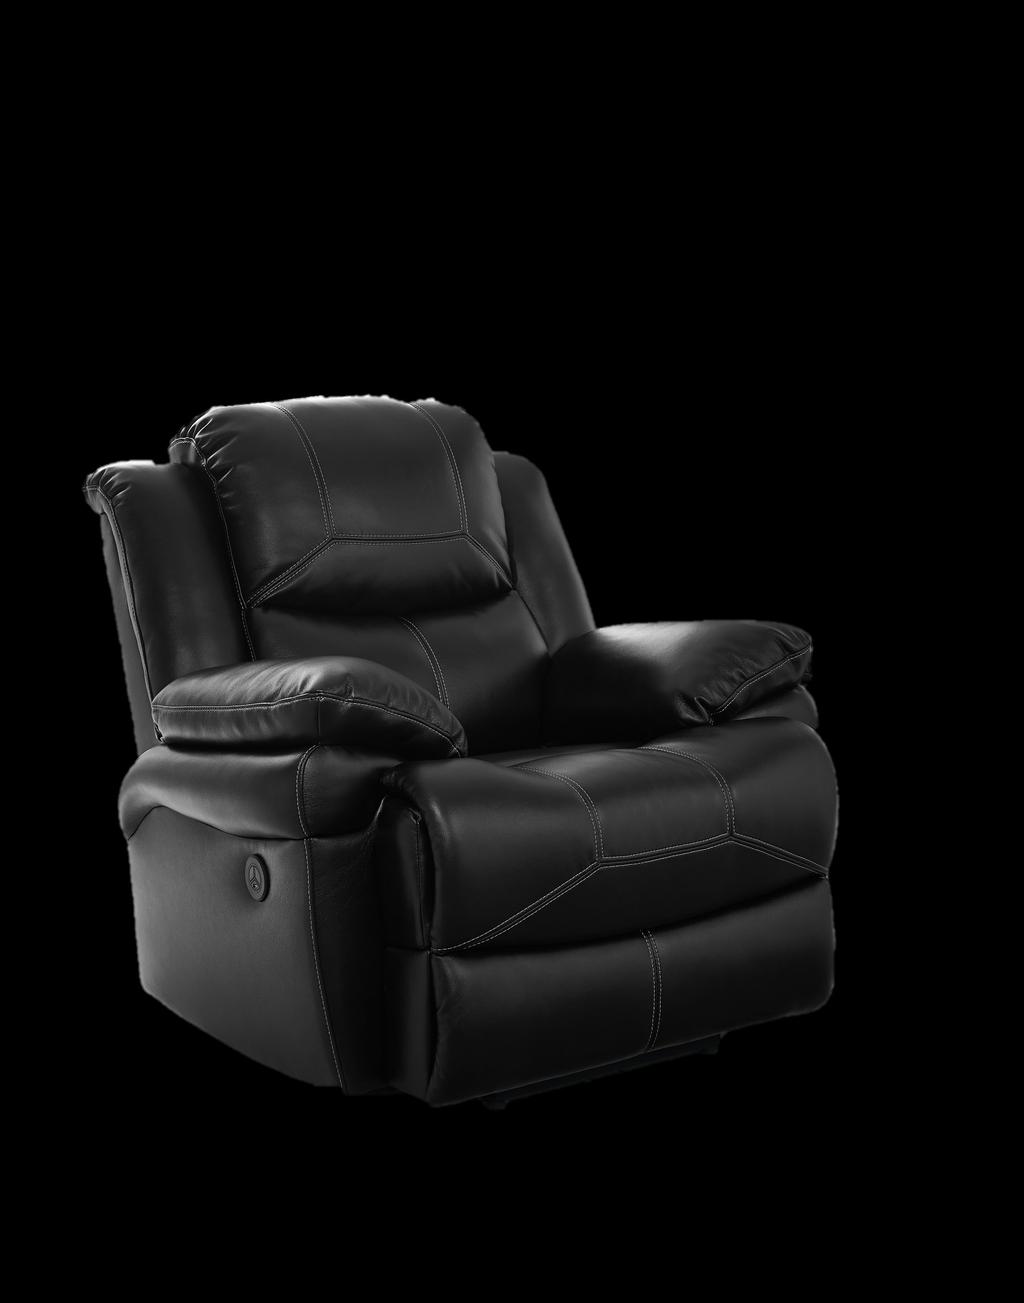 2177 Flynn Power & Non-Power Recliner If you want the absolutely coolest room in your neighborhood, this Power Motion group with Multi Colored